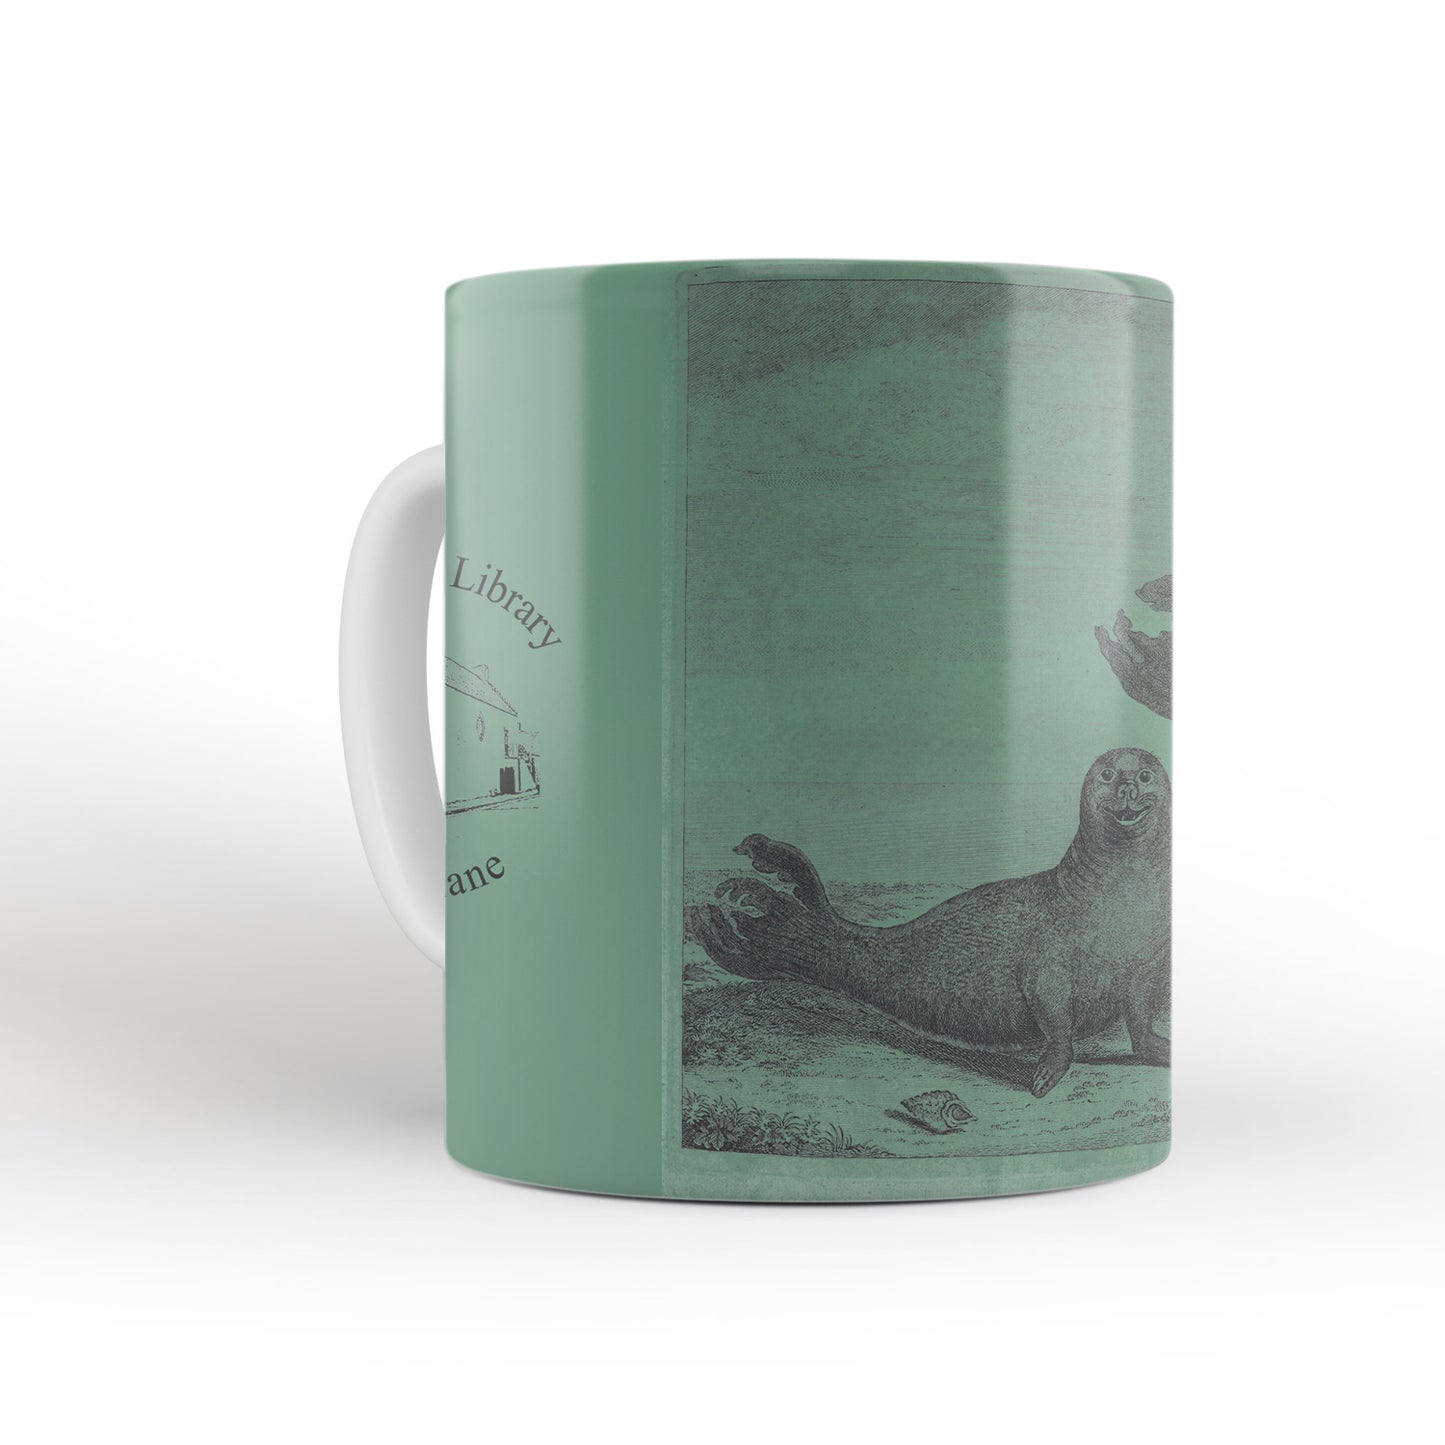 Green Elephant Seals mug from Travels Around the World (1740 to 1744), George Anson, Leighton Library